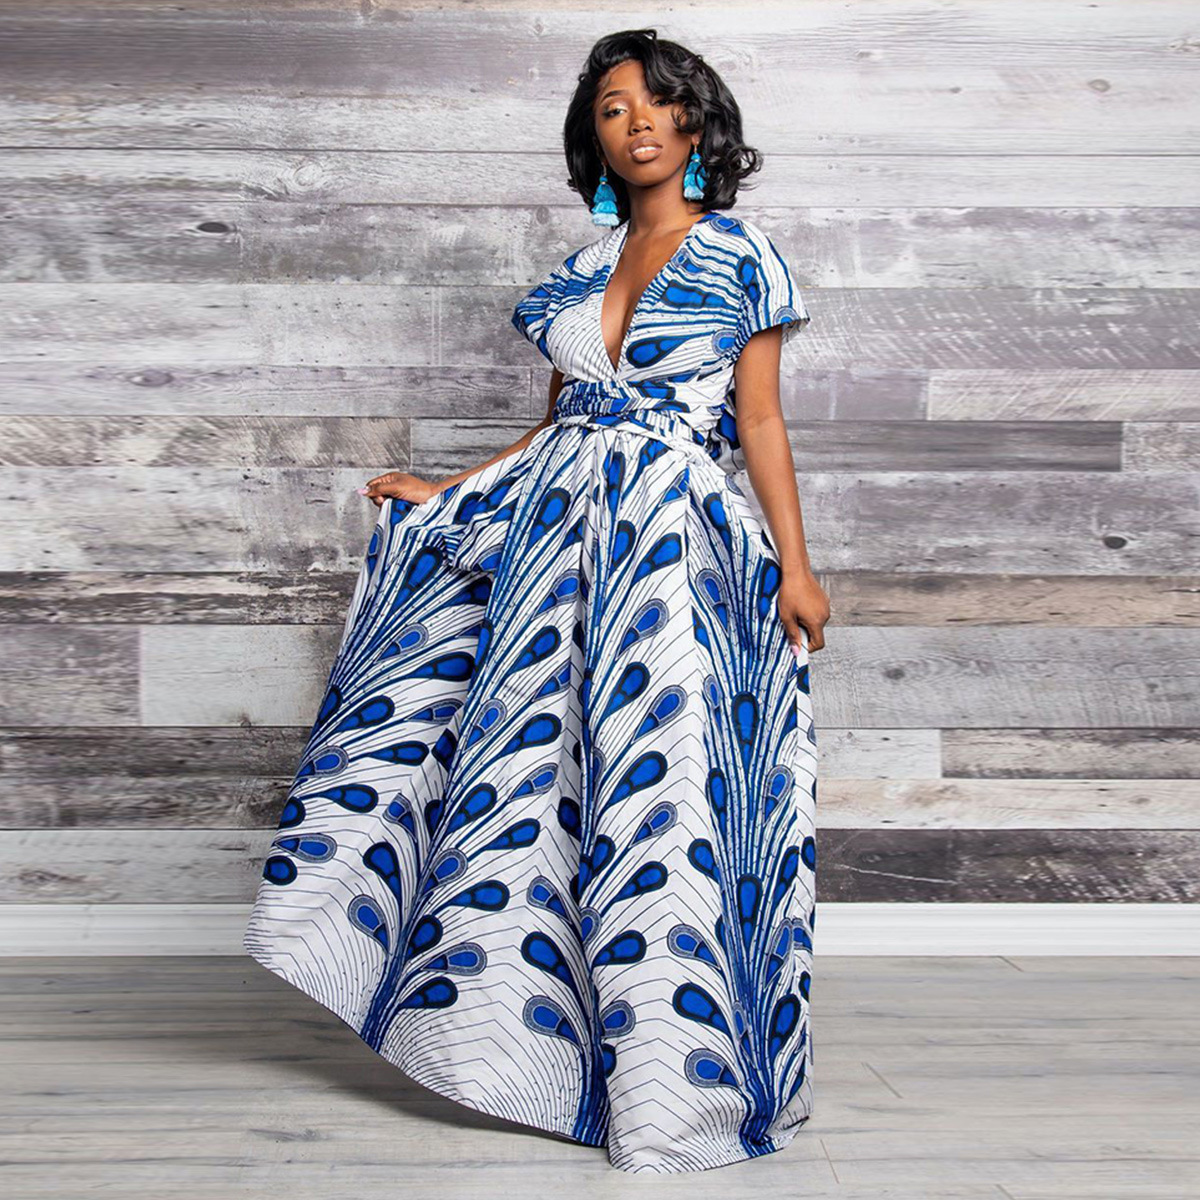 Why you should own a kitenge outfit Kitenge designs How to